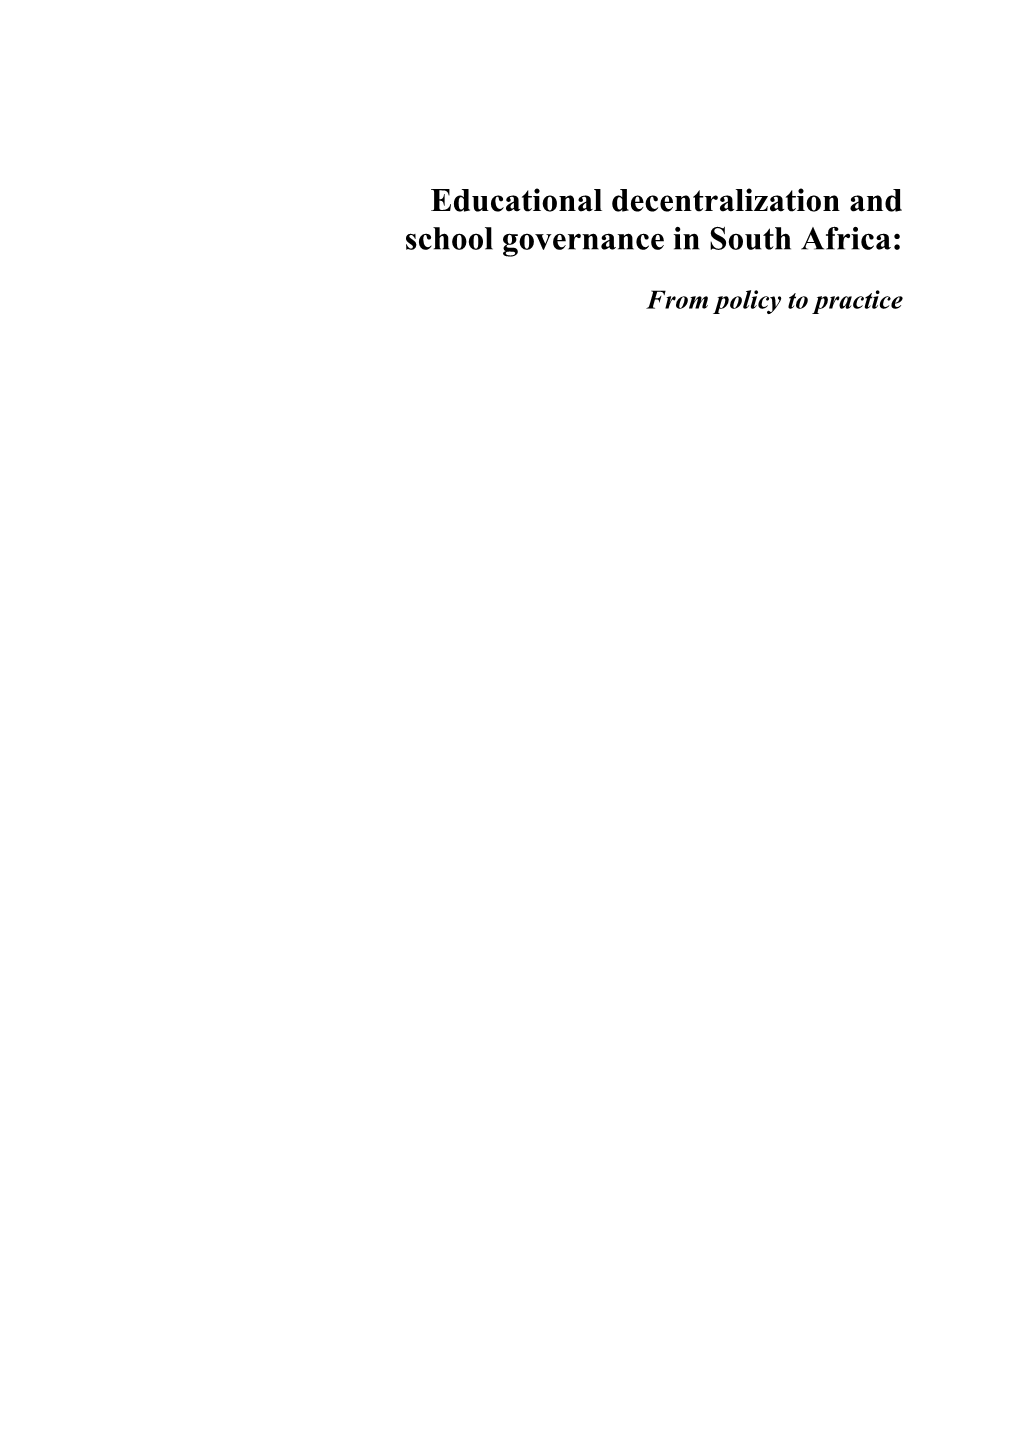 Educational Decentralization and School Governance in South Africa